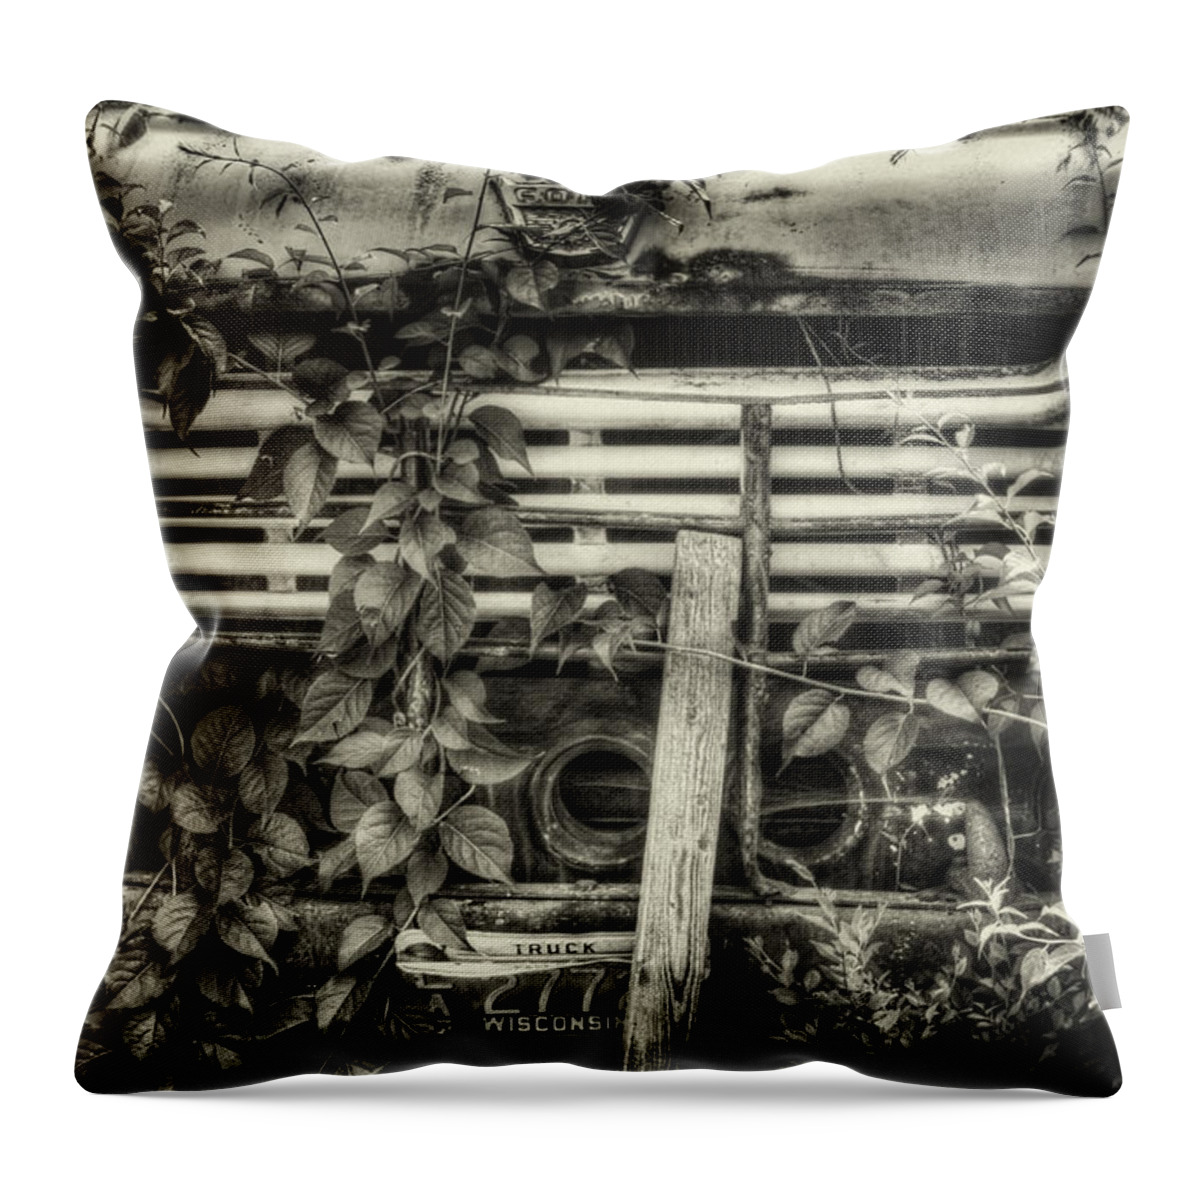 Ford Truck Throw Pillow featuring the photograph Overgrown Ford Truck by Thomas Young